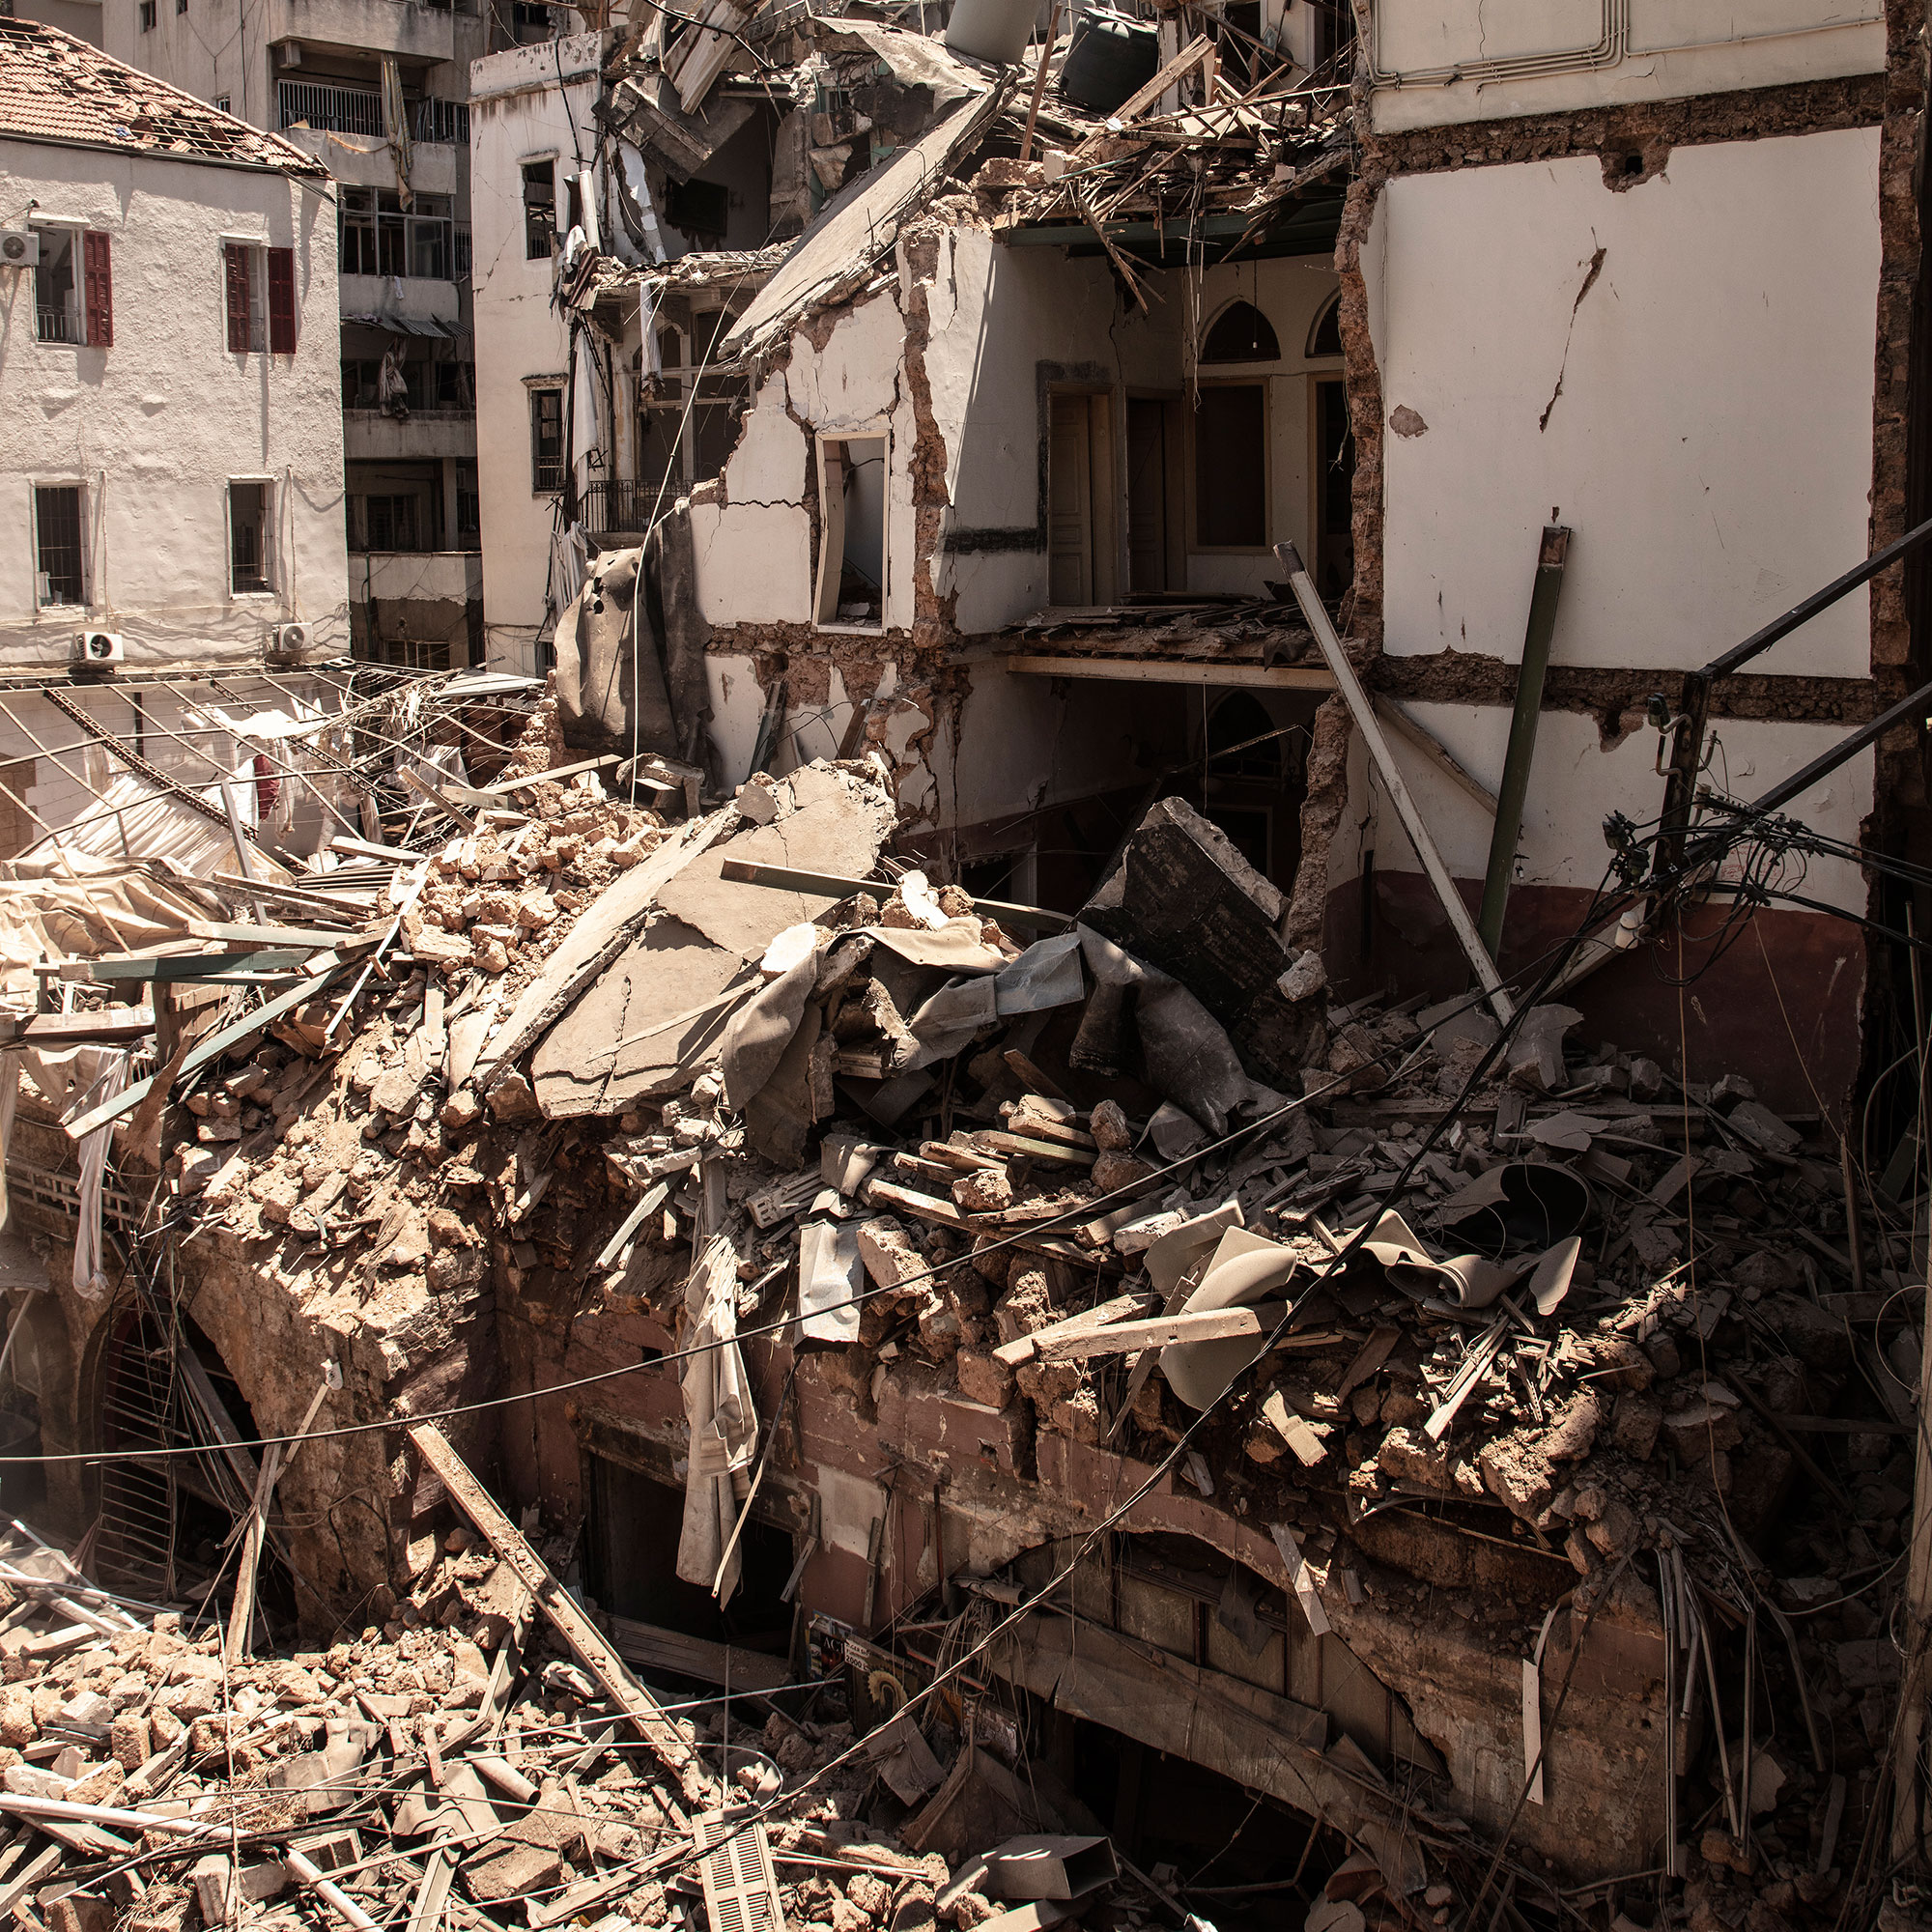 Collapsed buildings in the streets next to Moukaddem's apartment